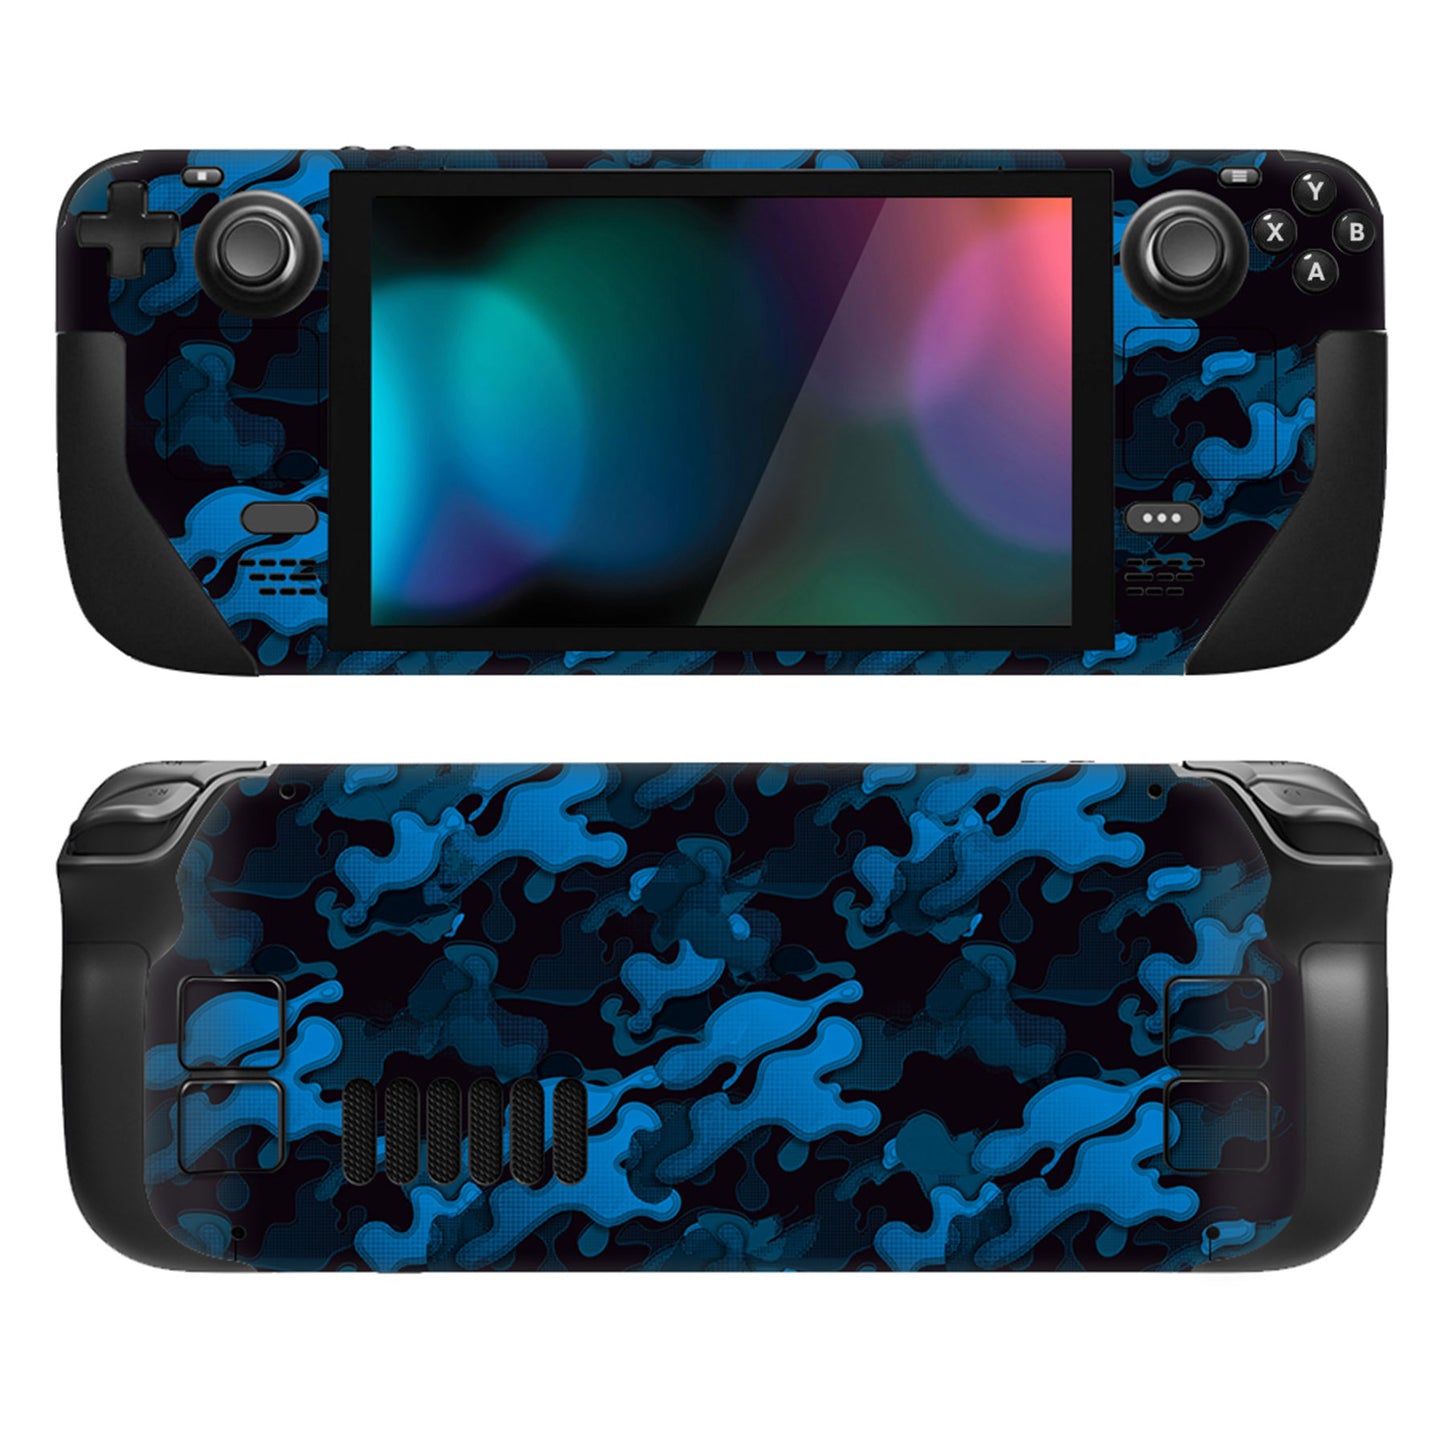 PlayVital Full Set Protective Skin Decal for Steam Deck, Custom Stickers Vinyl Cover for Steam Deck Handheld Gaming PC - Black Blue Camouflage - SDTM013 playvital